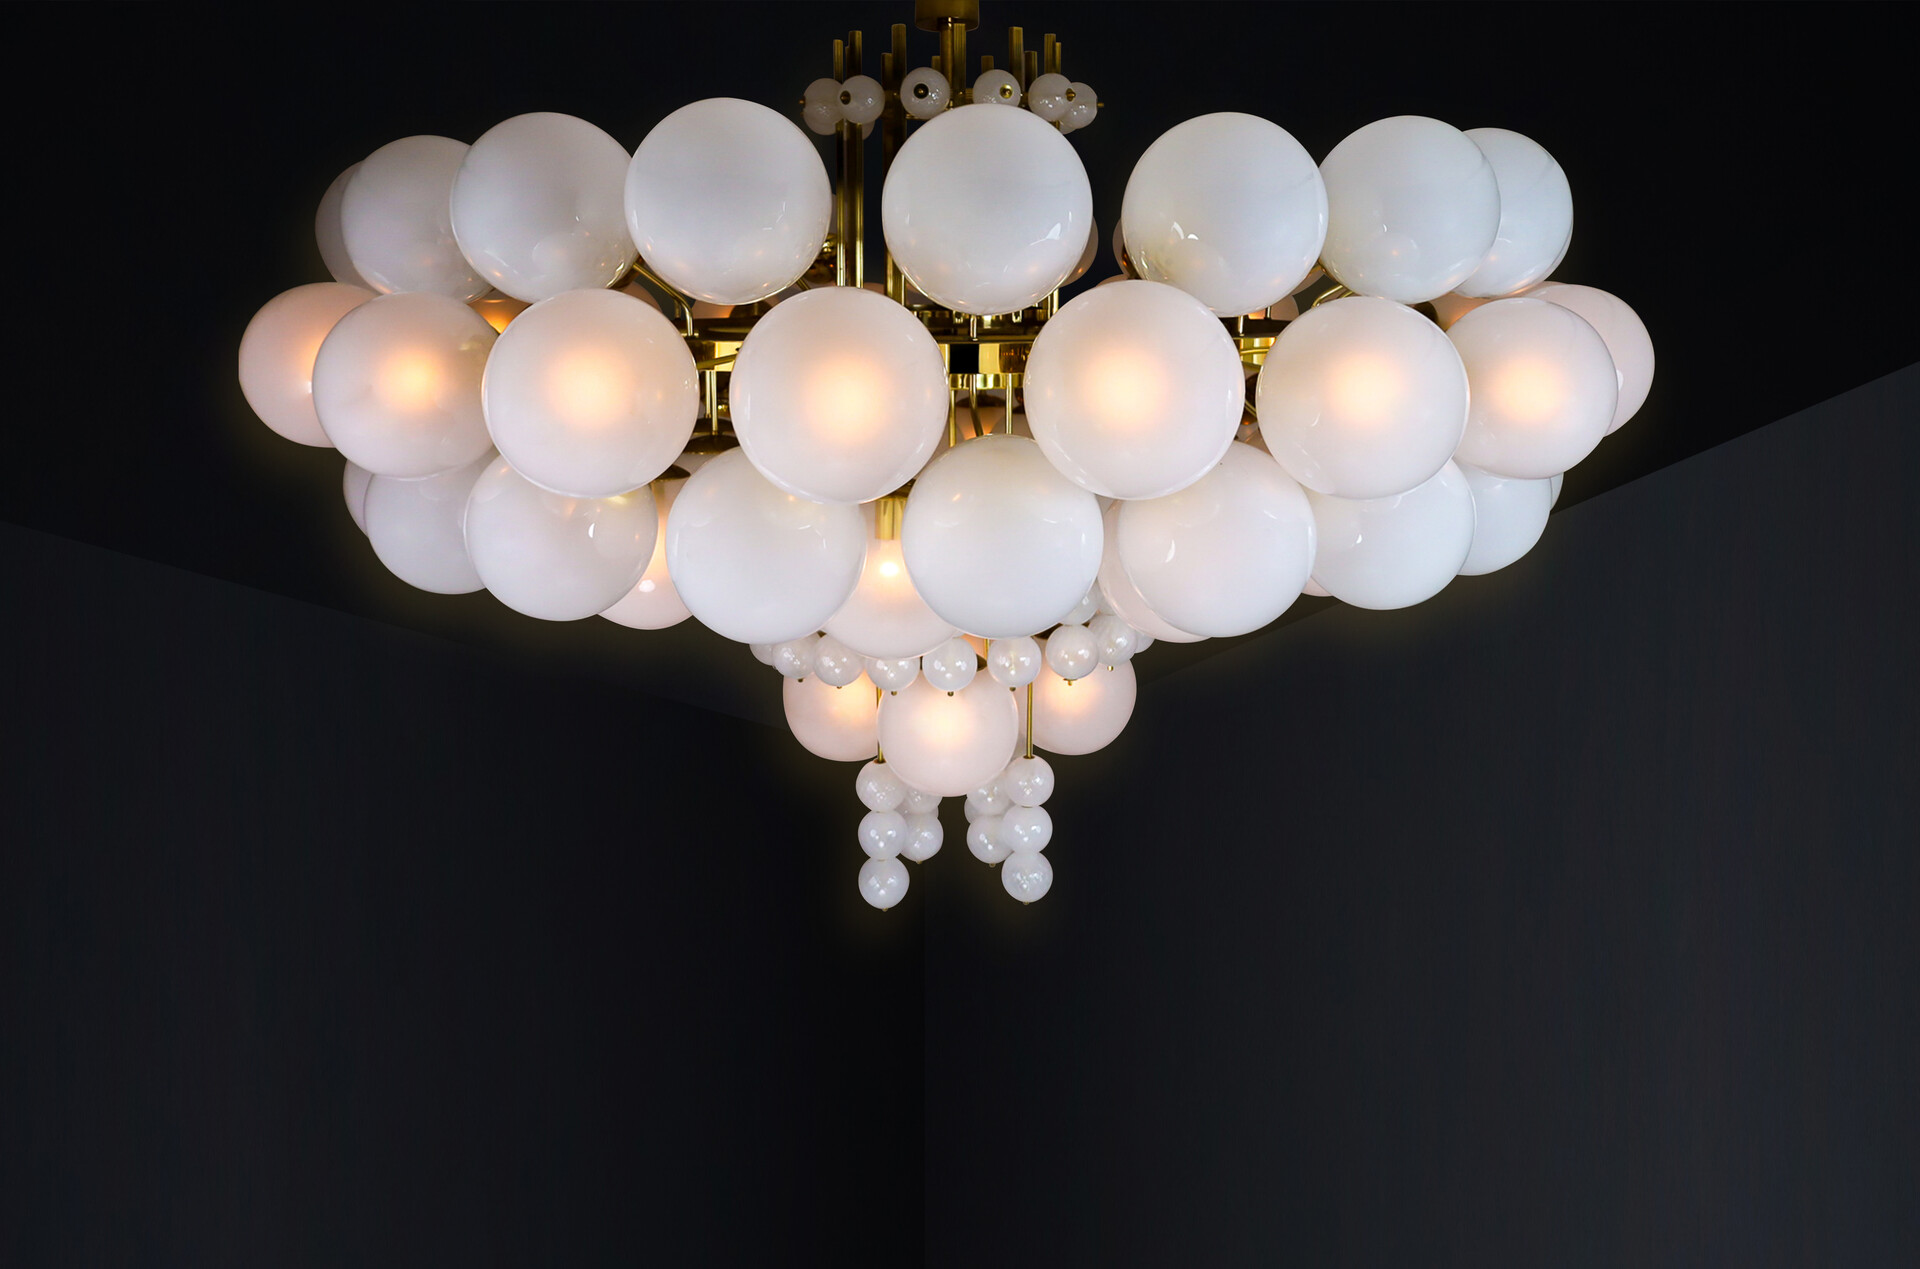 Mid century modern Grande hotel chandelier with brass fixture and hand-blowed frosted glass globes by Preciosa, Czechia 1960s Mid-20th century